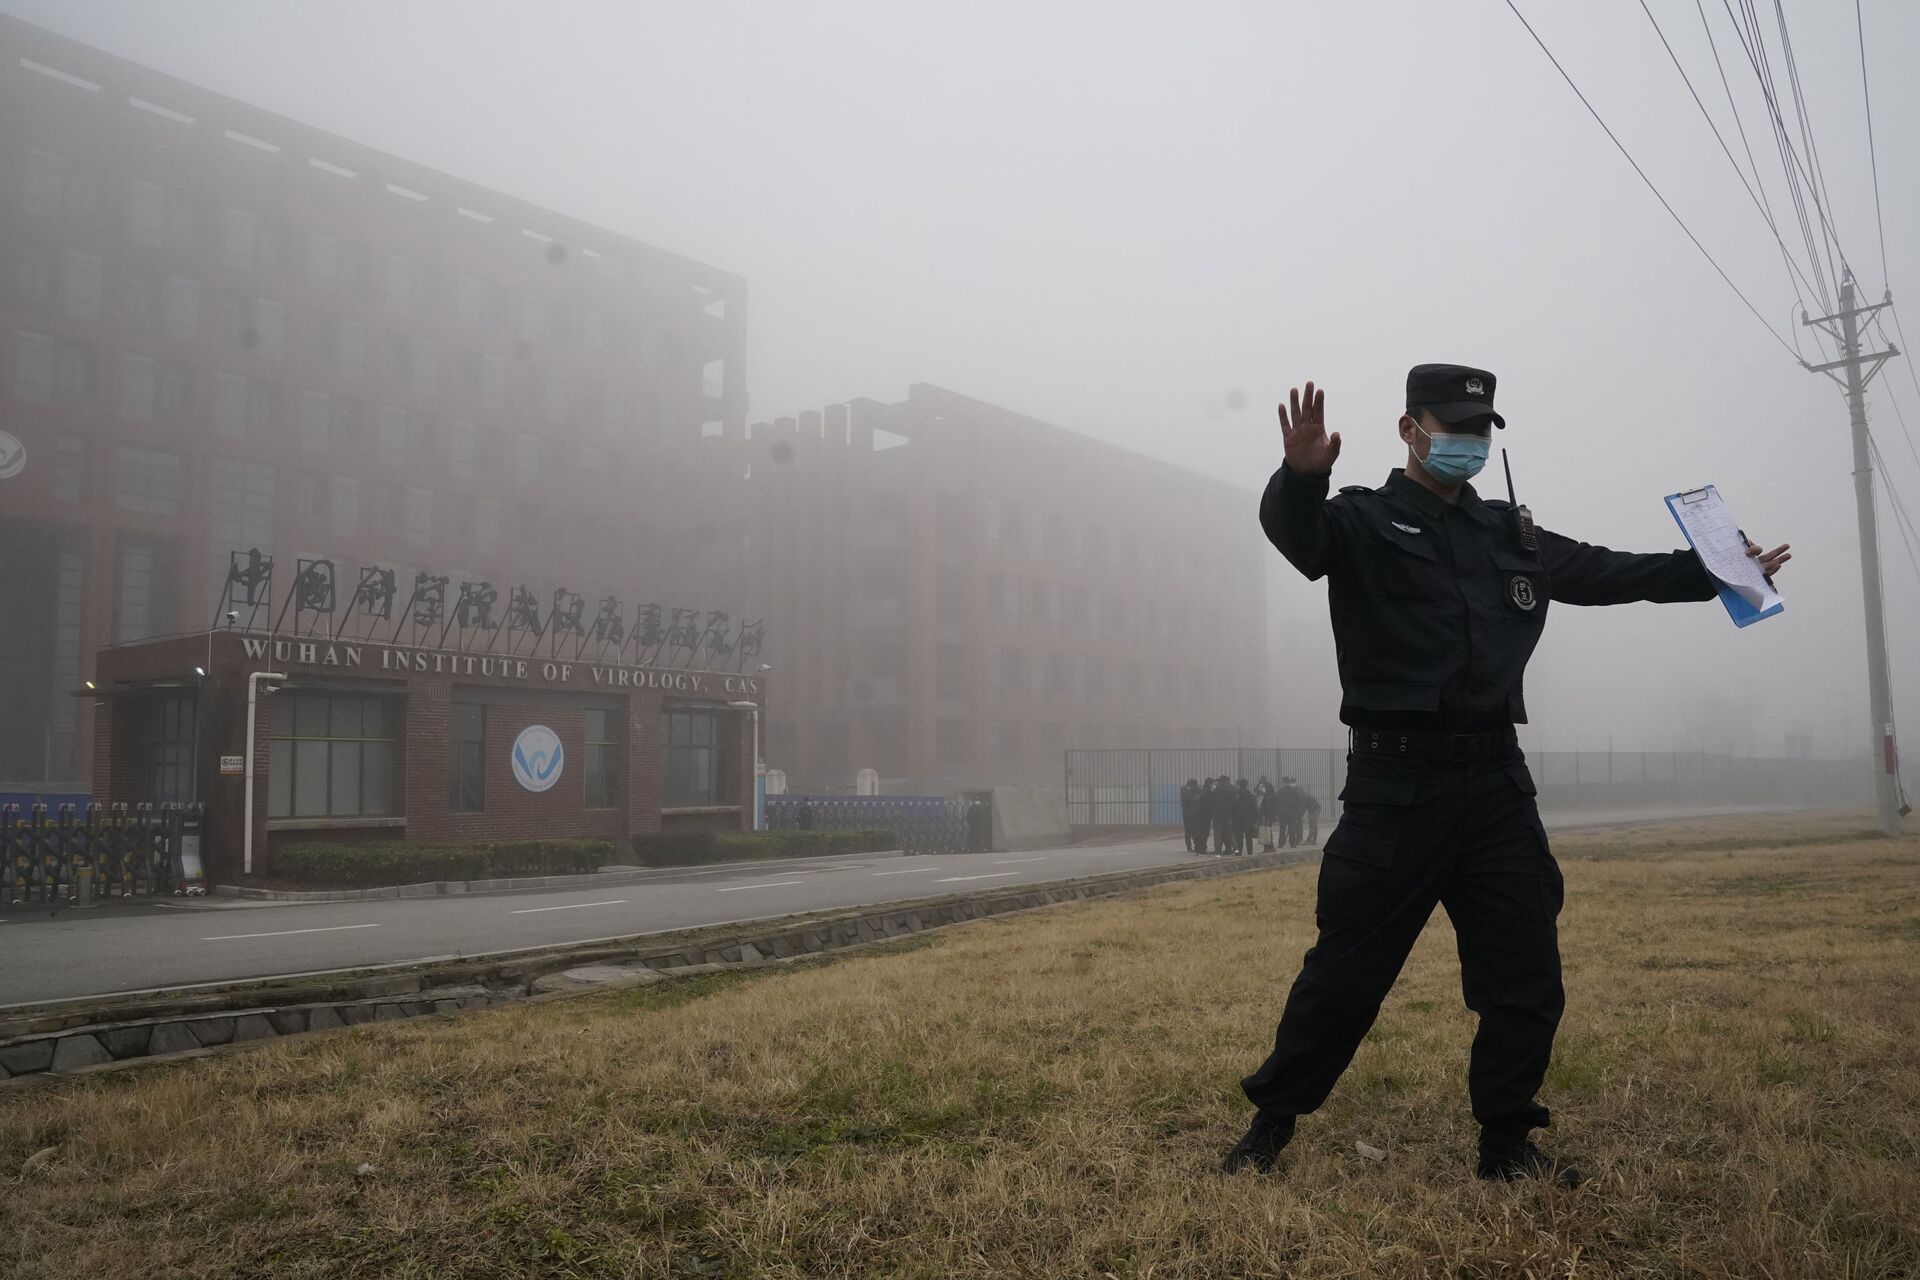 A security official moves journalists away from the Wuhan Institute of Virology after a World Health Organization team arrived for a field visit in Wuhan in China's Hubei province on Wednesday, Feb. 3, 2021 - Sputnik International, 1920, 07.09.2021